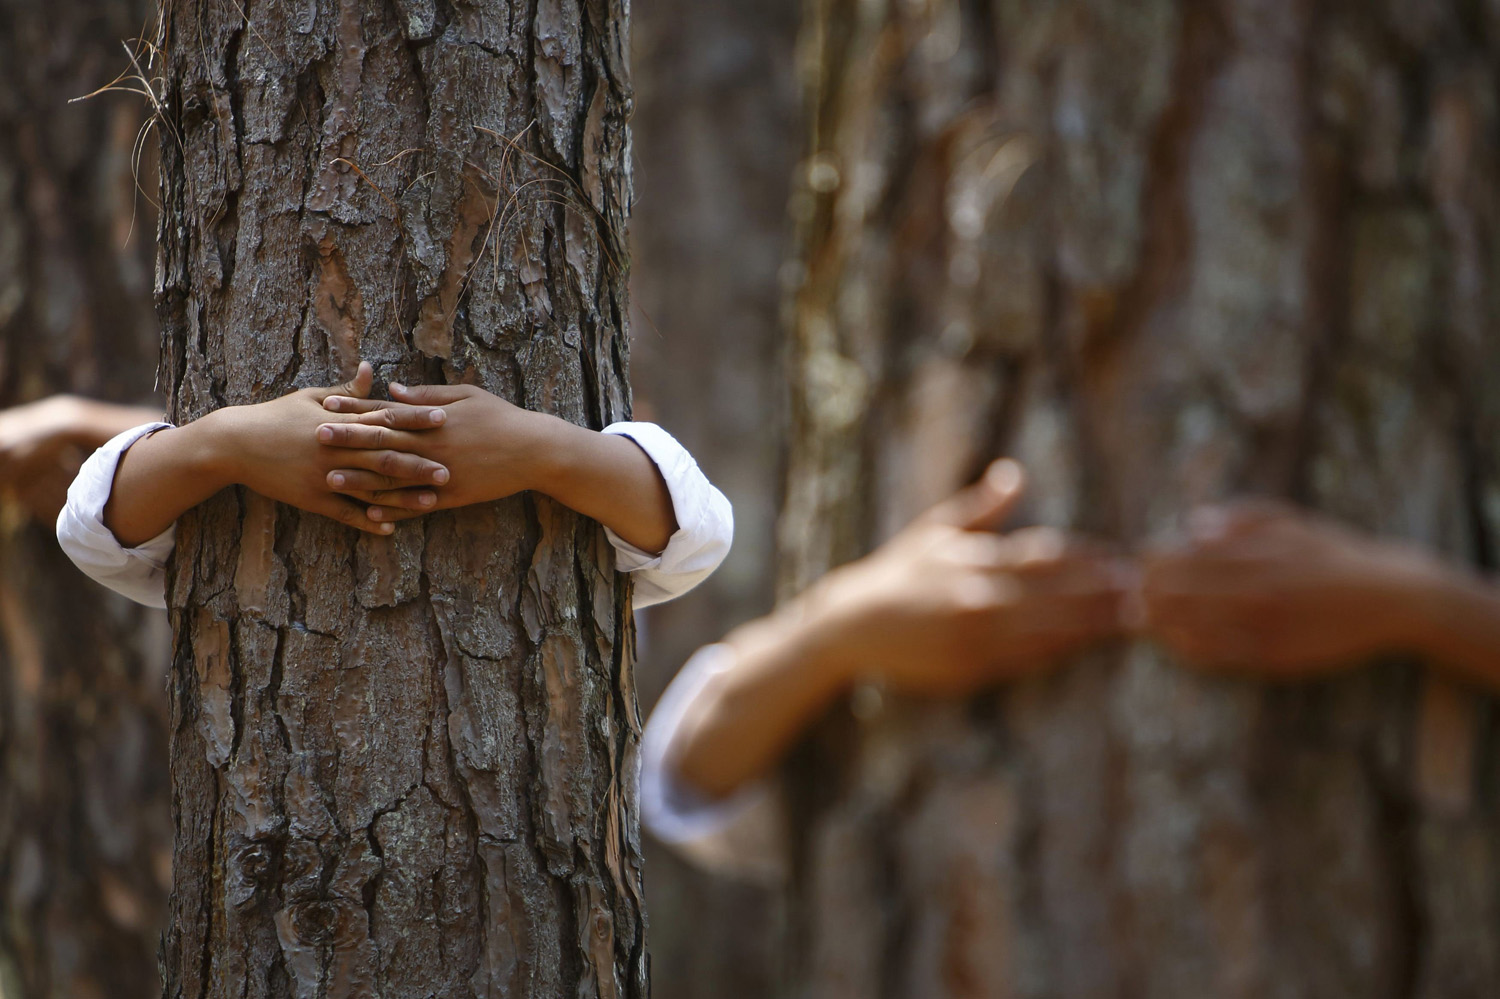 Hands hugging trees are pictured as participants take part in an attempt to break the Guinness World Record for the most number of people hugging trees for two minutes in Kathmandu on June 5, 2014.